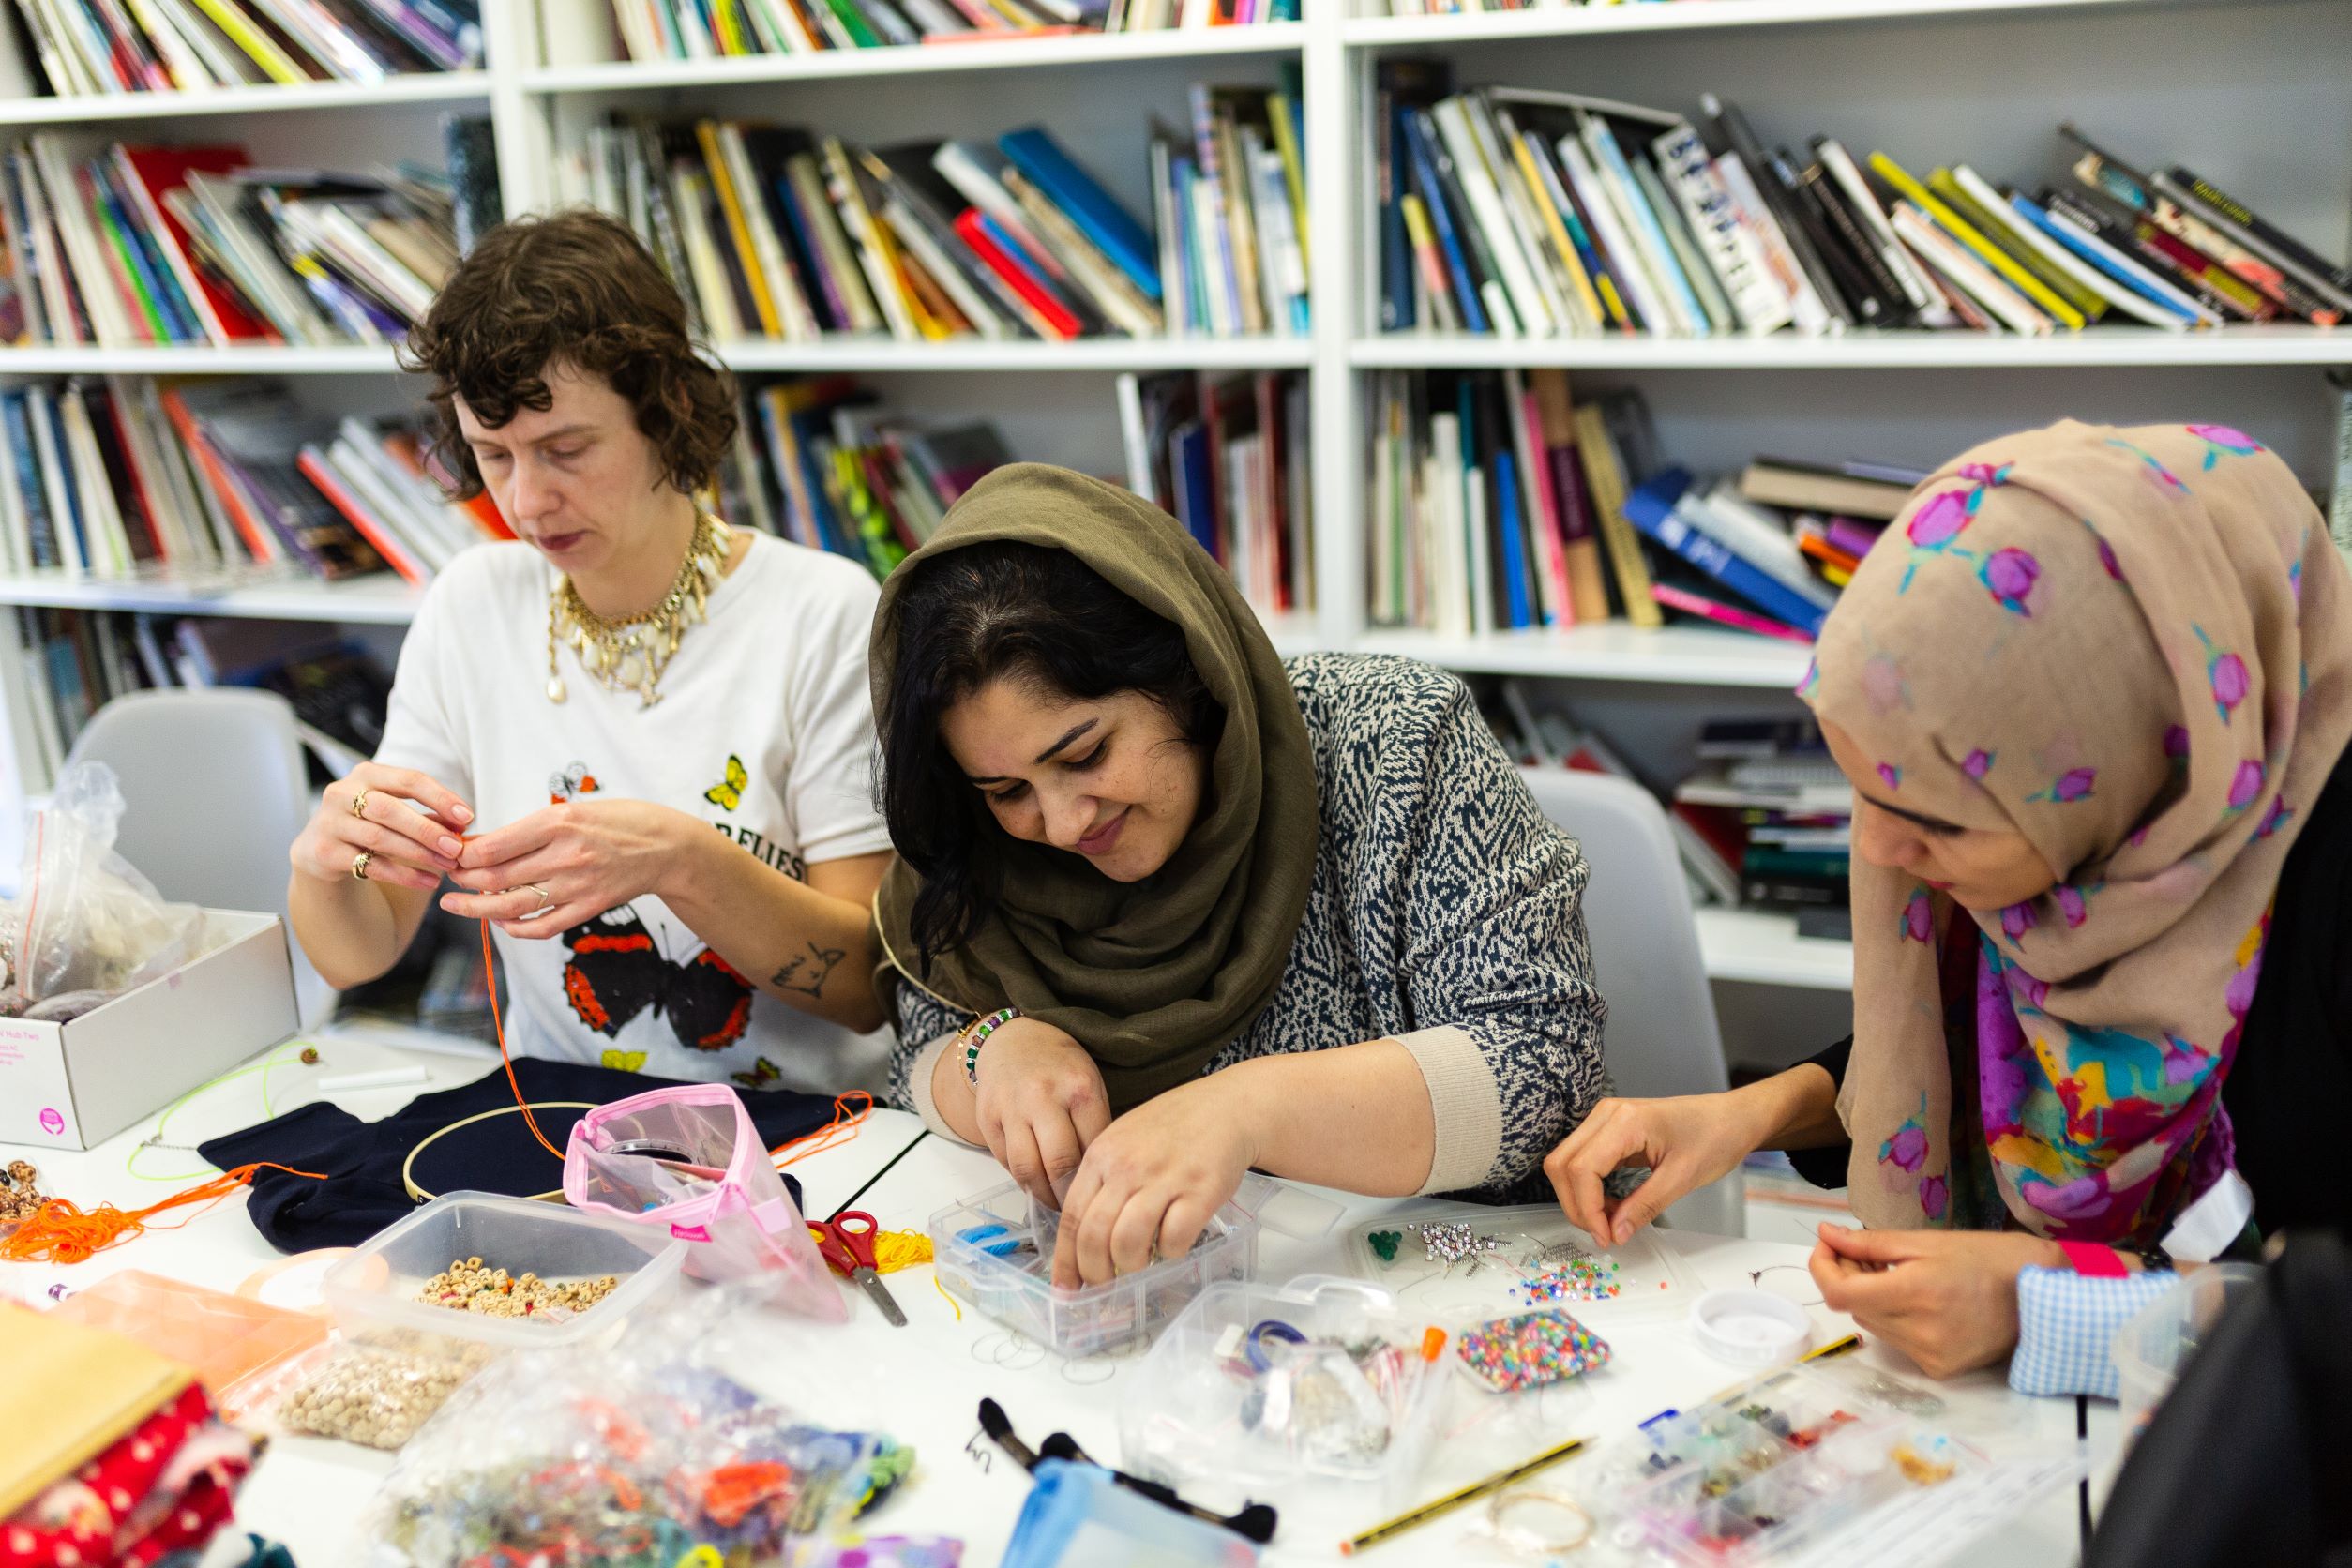 A group of people gathered around a table in an art studio, creating with different materials including beads and threads. A shelf with art supplies is in the background. The mood is one of creativity, community, and collaboration.